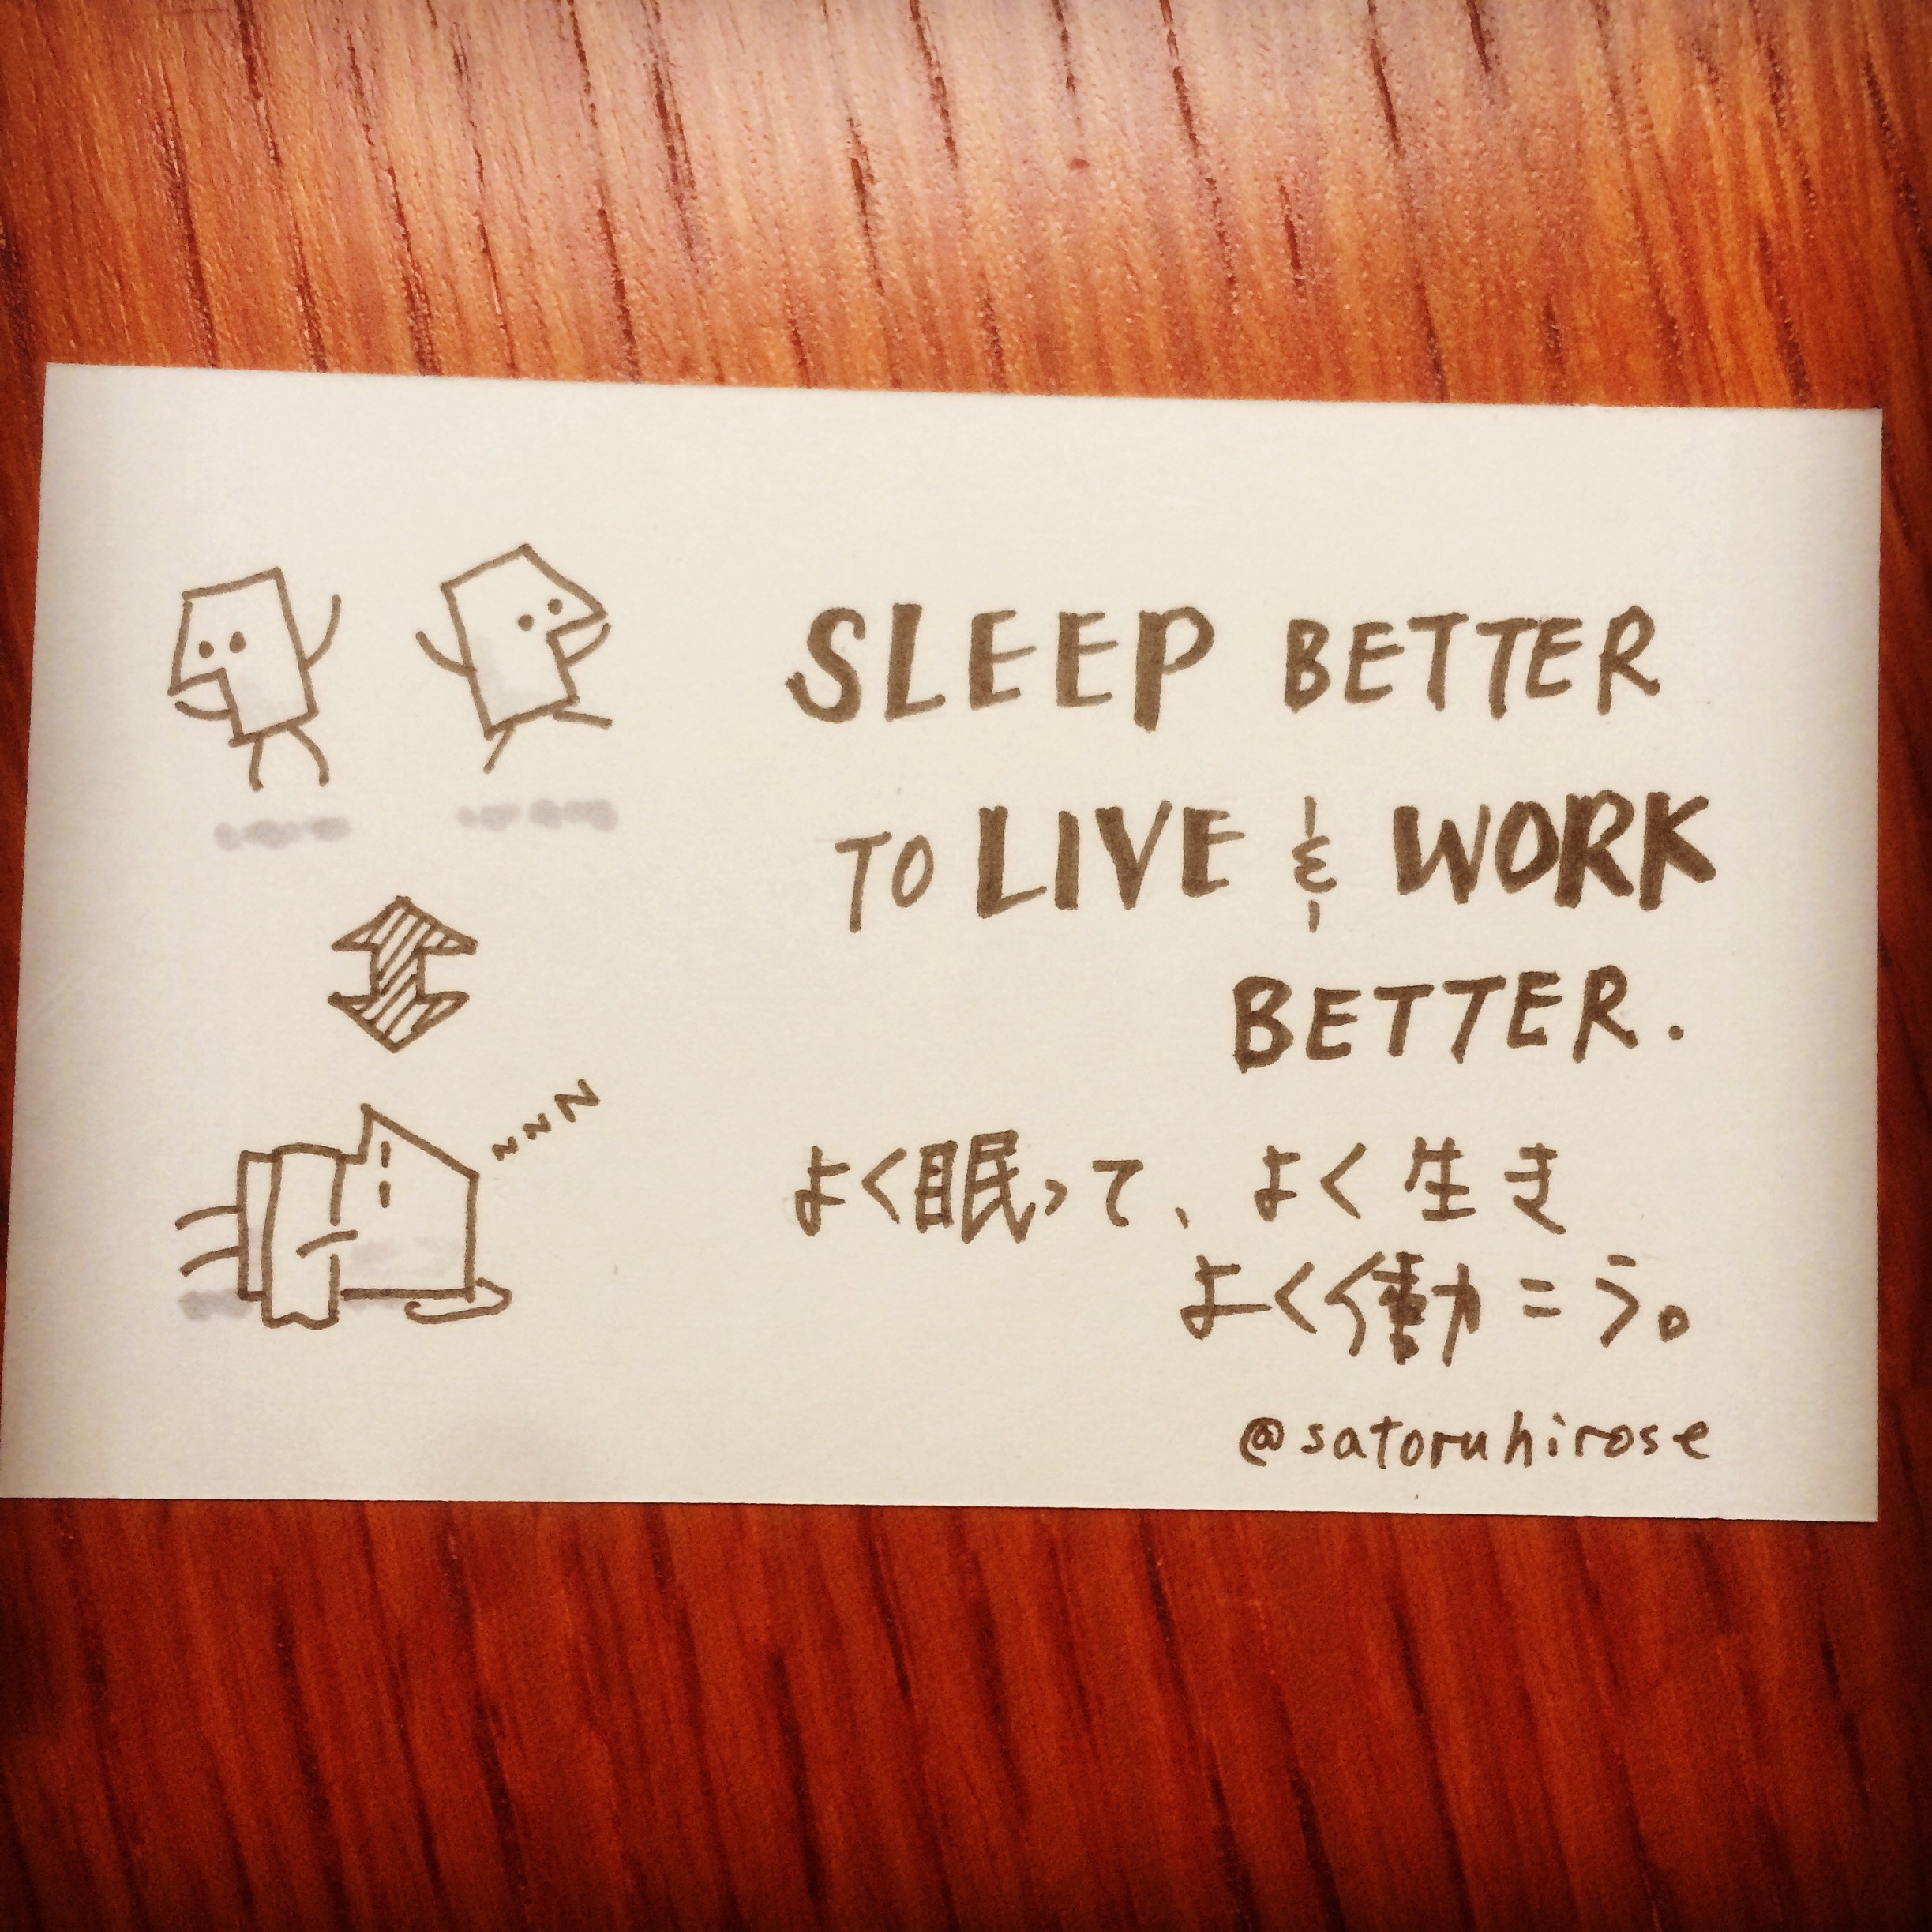 Sleep better to live and work better.